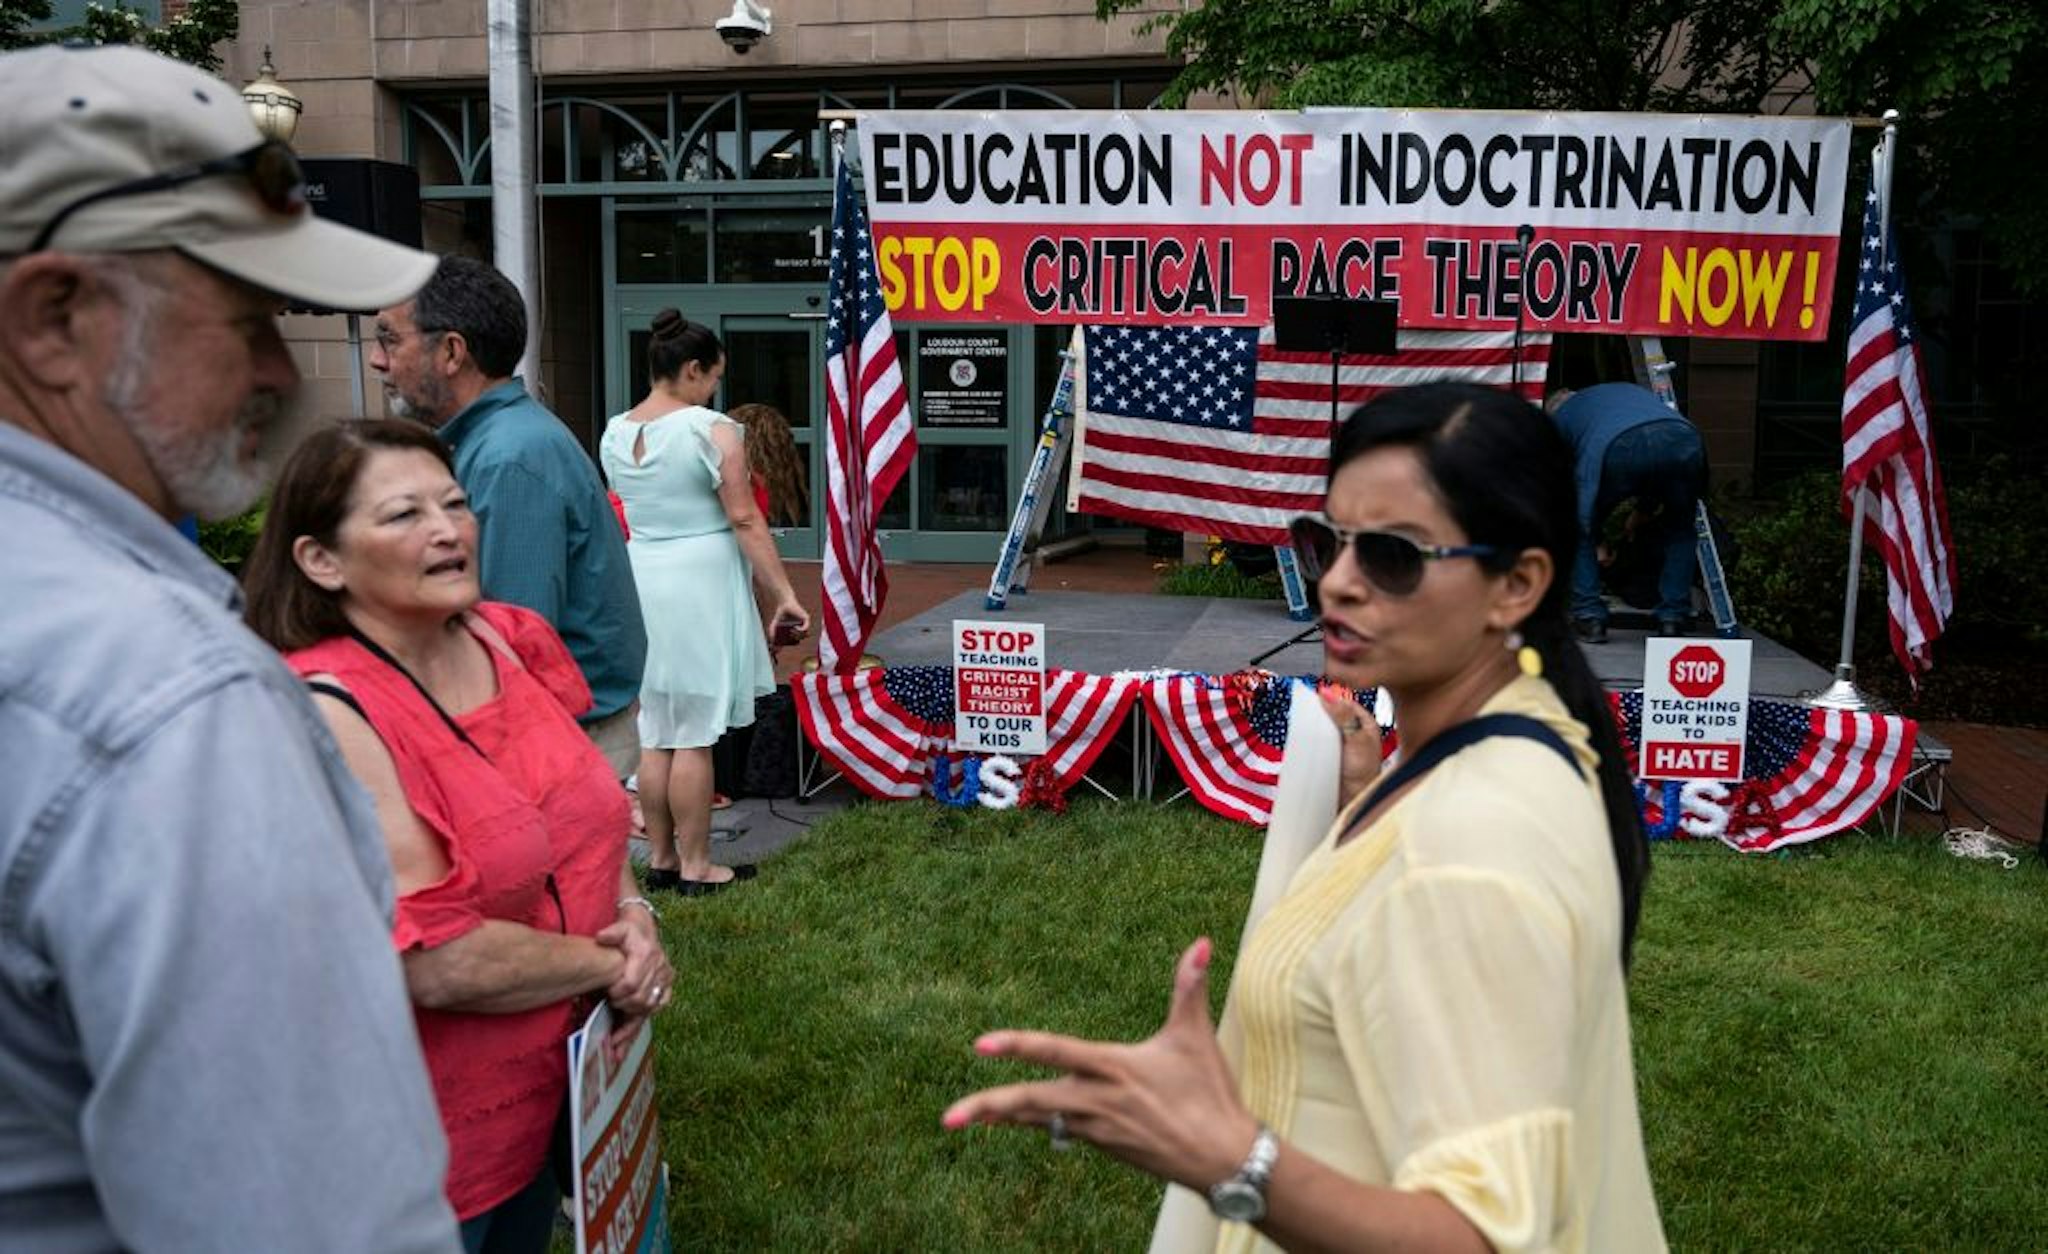 People talk before the start of a rally against "critical race theory" (CRT) being taught in schools at the Loudoun County Government center in Leesburg, Virginia on June 12, 2021.